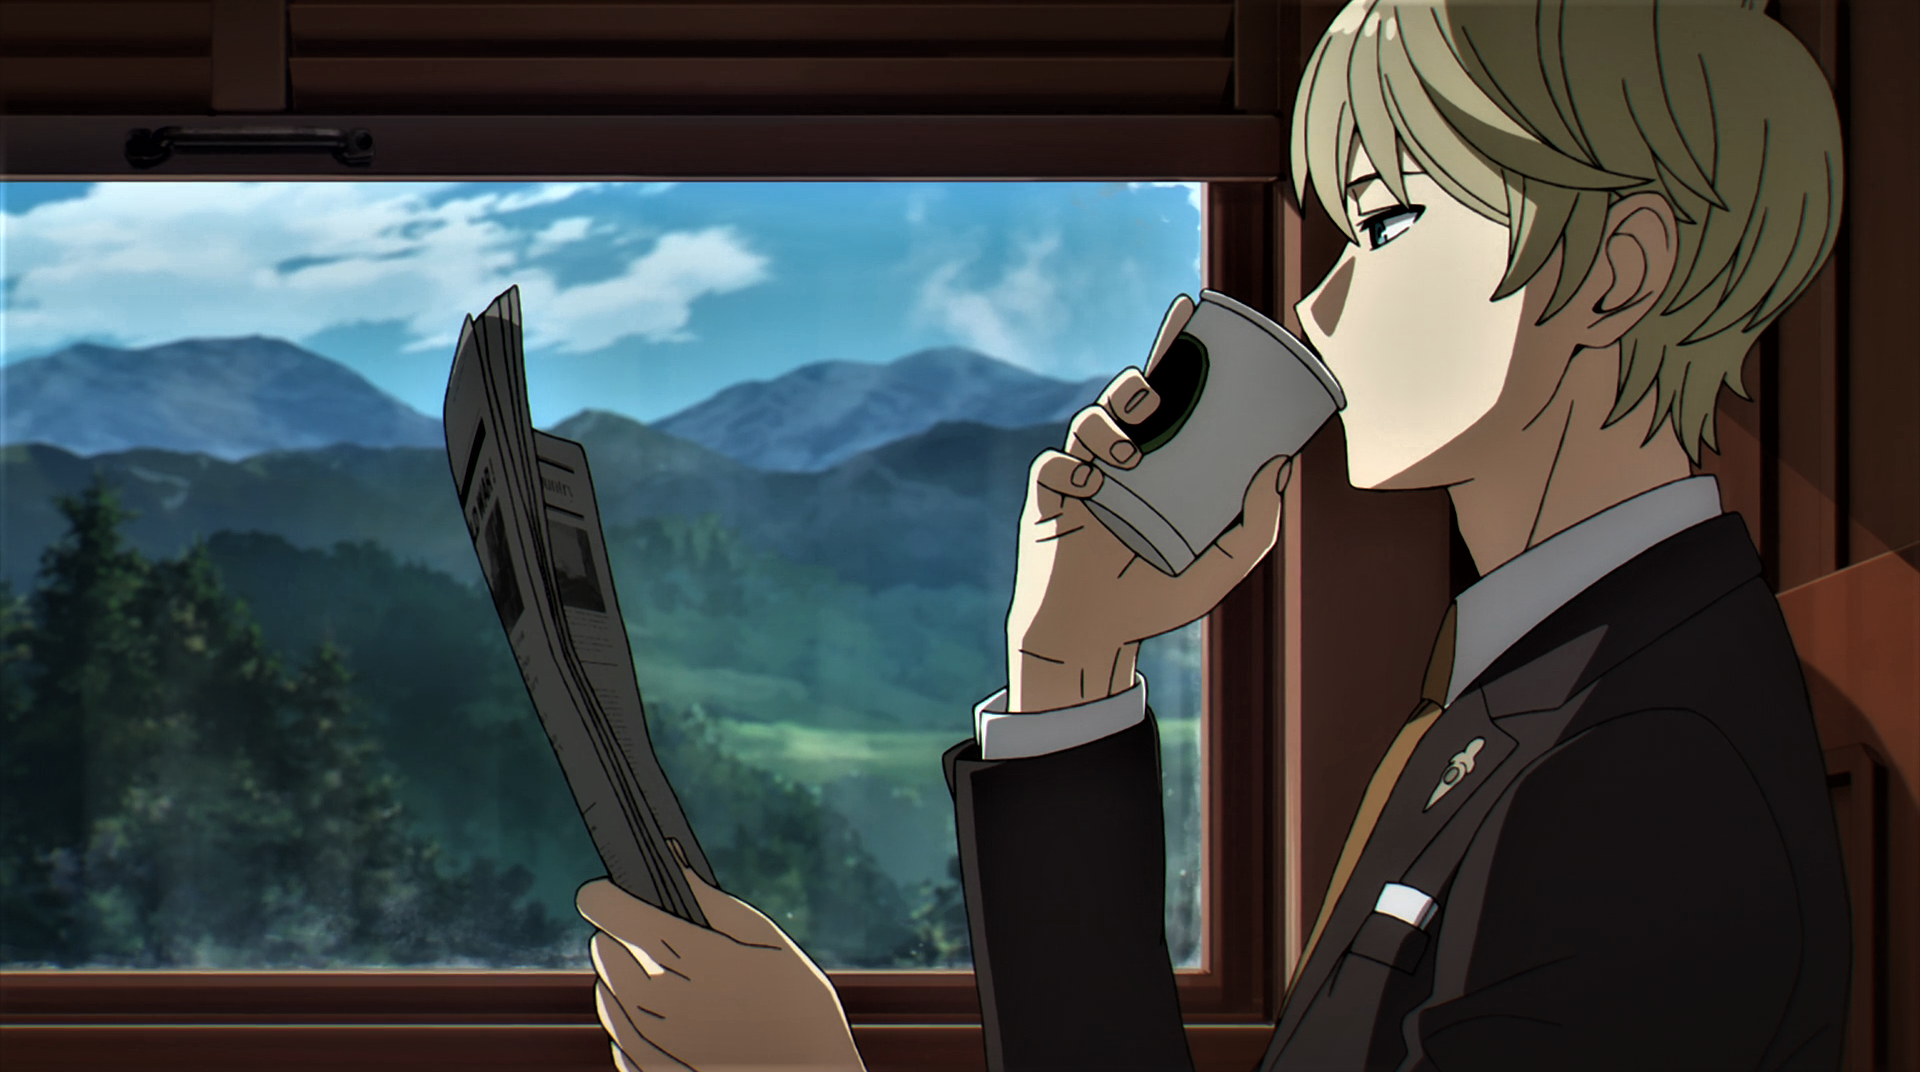 Anime 1920x1072 Spy x Family Loid Forger coffee blonde trees mountains reading newspapers suit and tie tie drinking sky anime Anime screenshot anime boys clouds